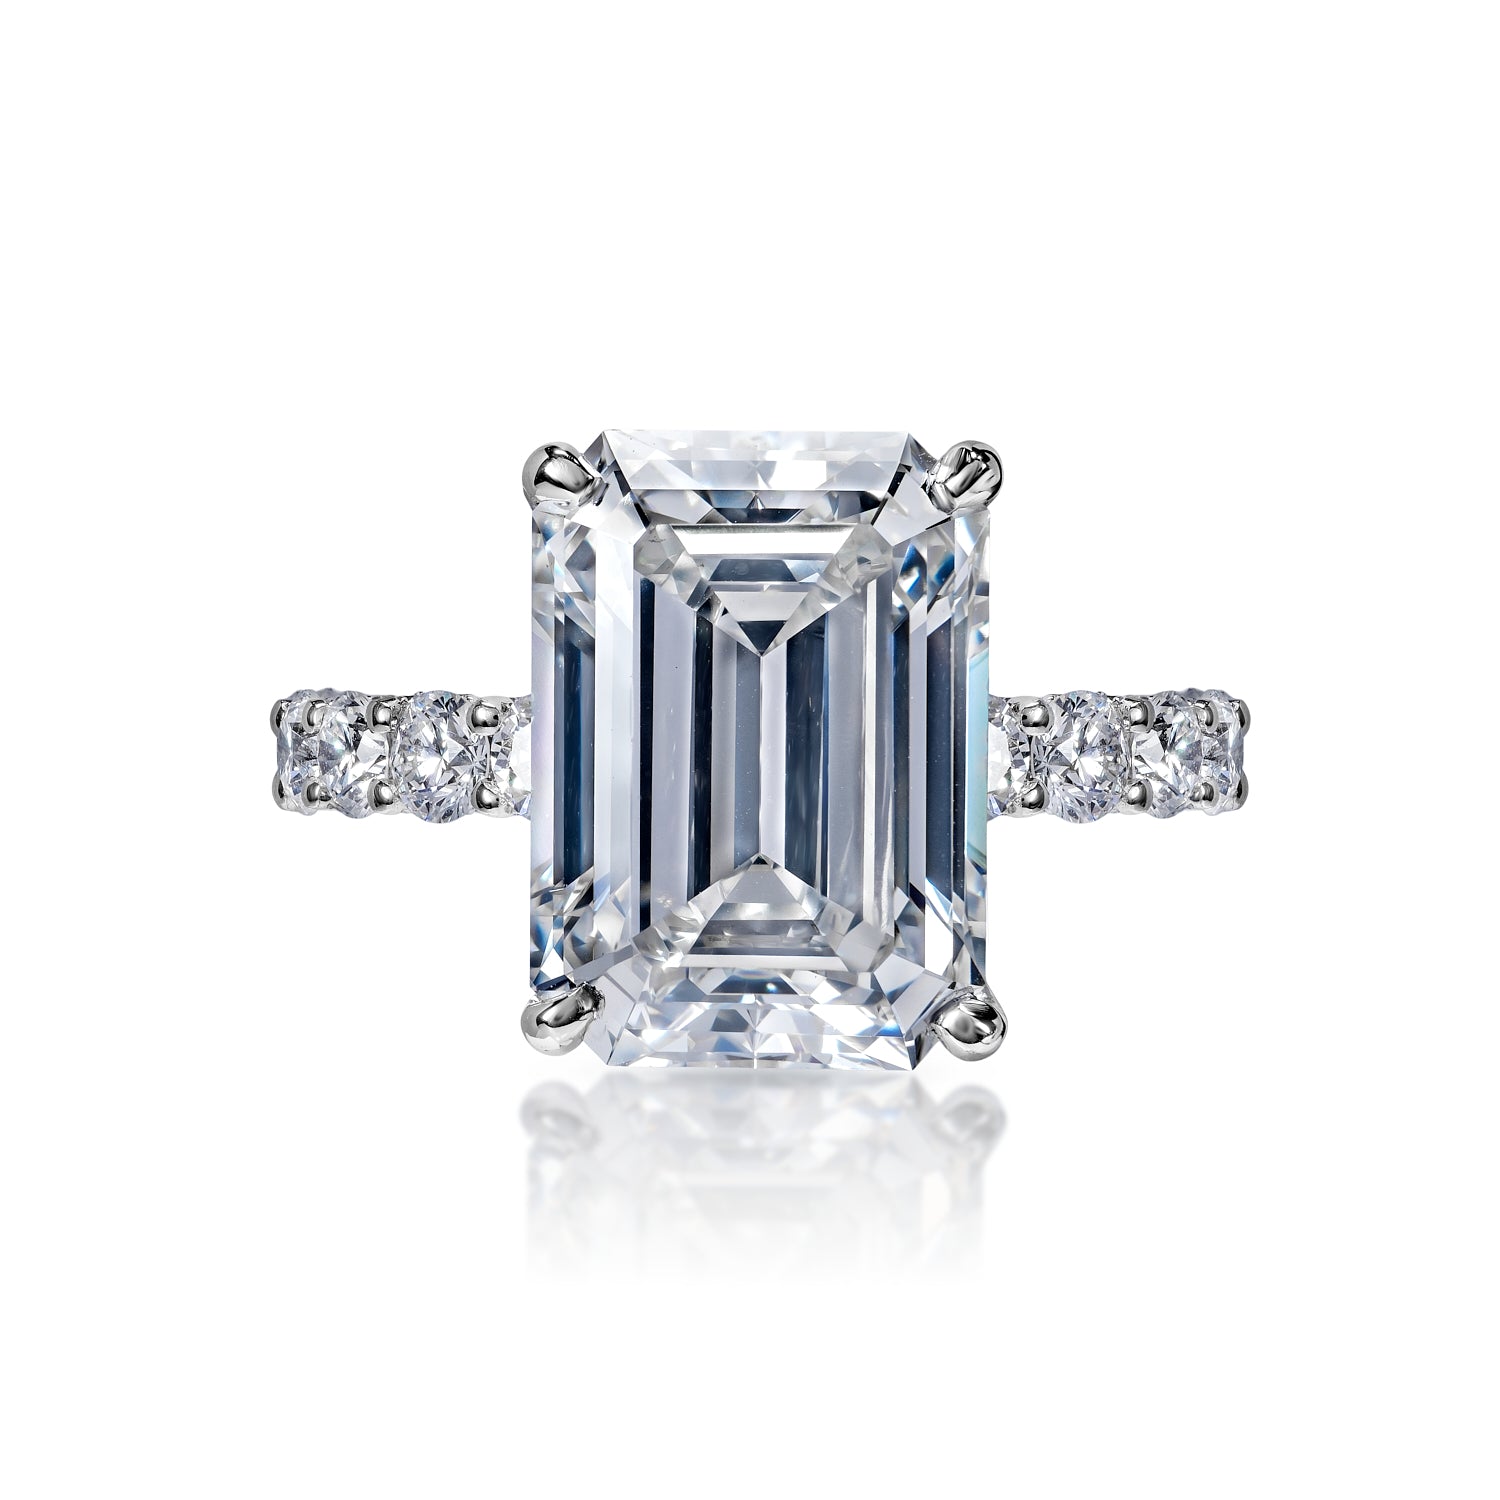 Francesca 10 Carats G IF Emerald Cut Diamond Engagement Ring in 18k White Gold Front View